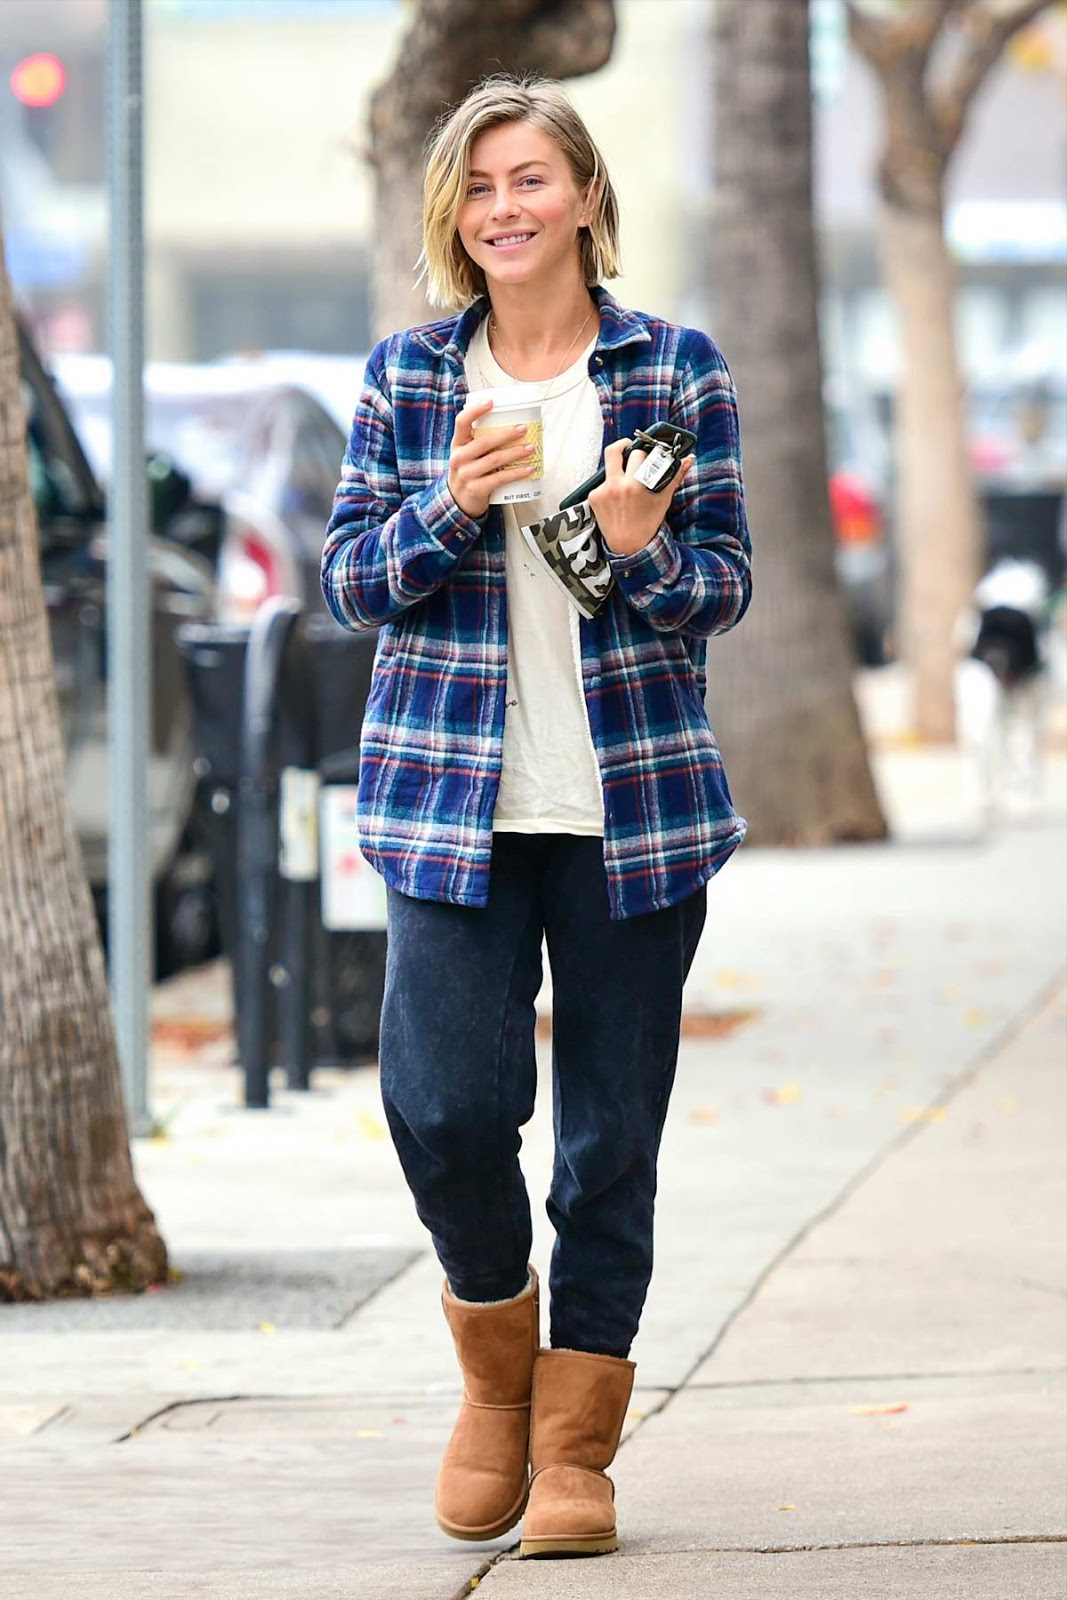 Julianne Hough in a flannel shirt, sweatpants and UGG boots in Studio City, California